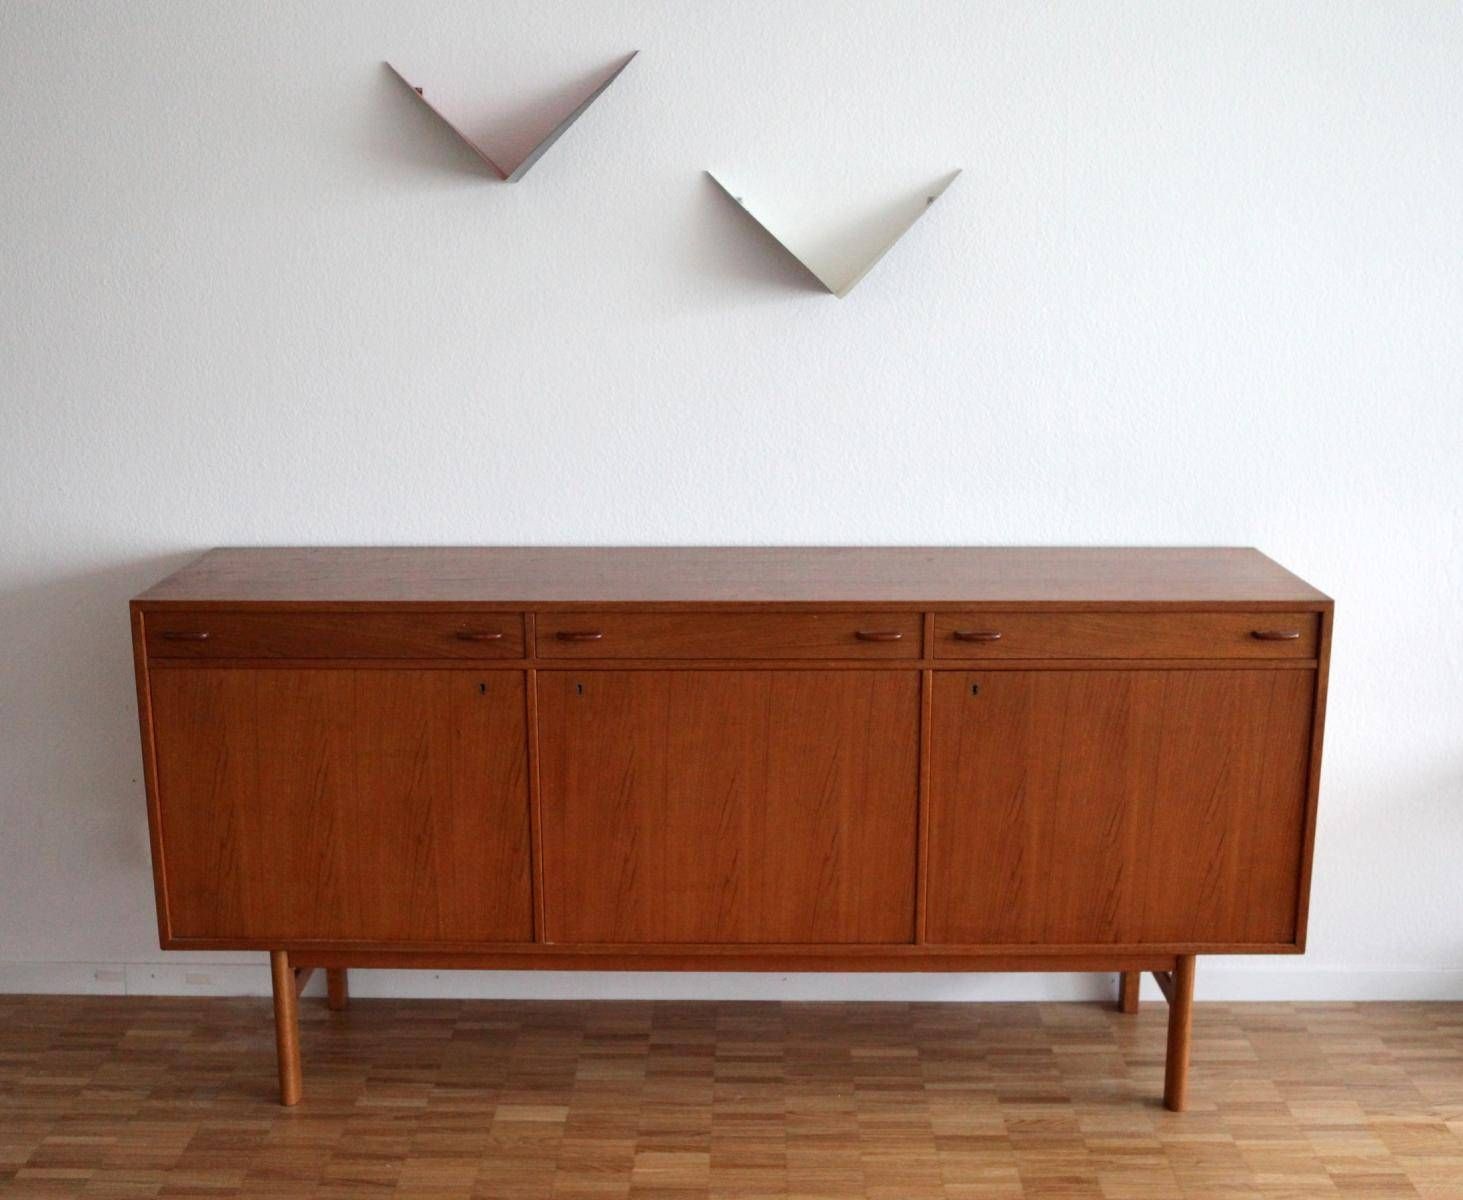 Danish Mid Century Modern Teak Sideboard For Sale At Pamono Pertaining To Latest Midcentury Sideboards (View 10 of 15)